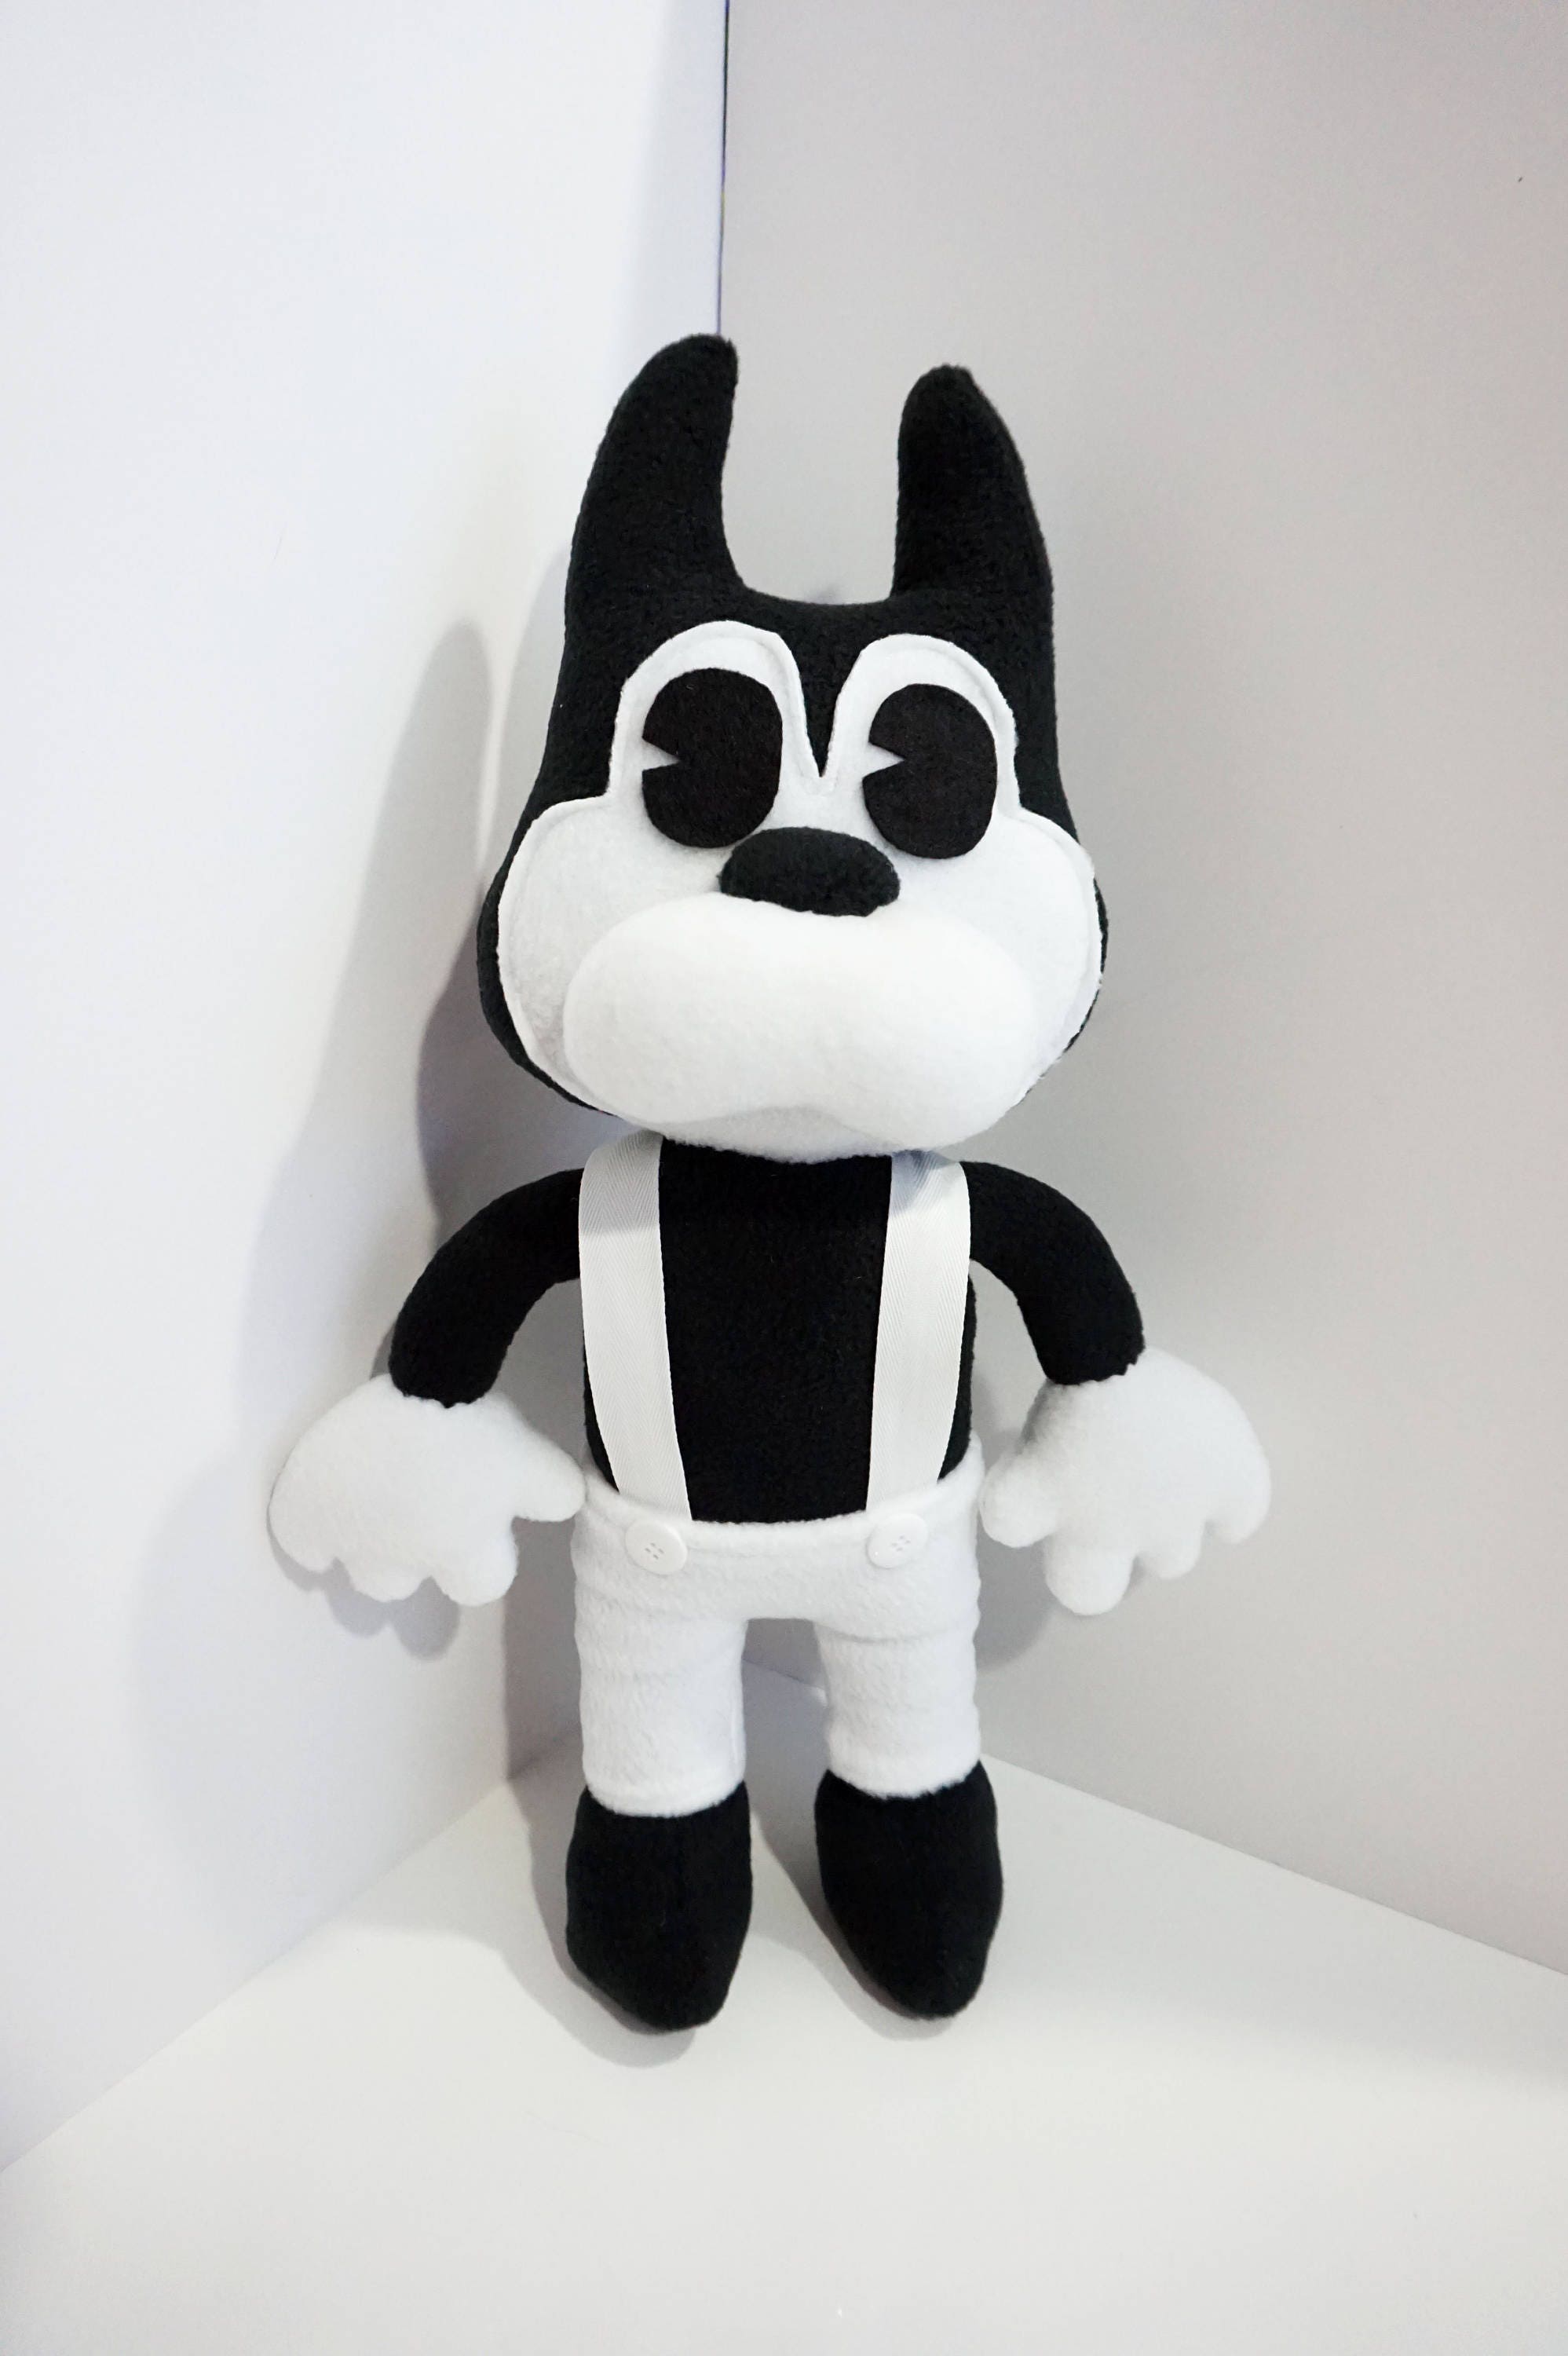 Boris Plush Inspired By Bendy And The Ink Machine Unofficial 8566